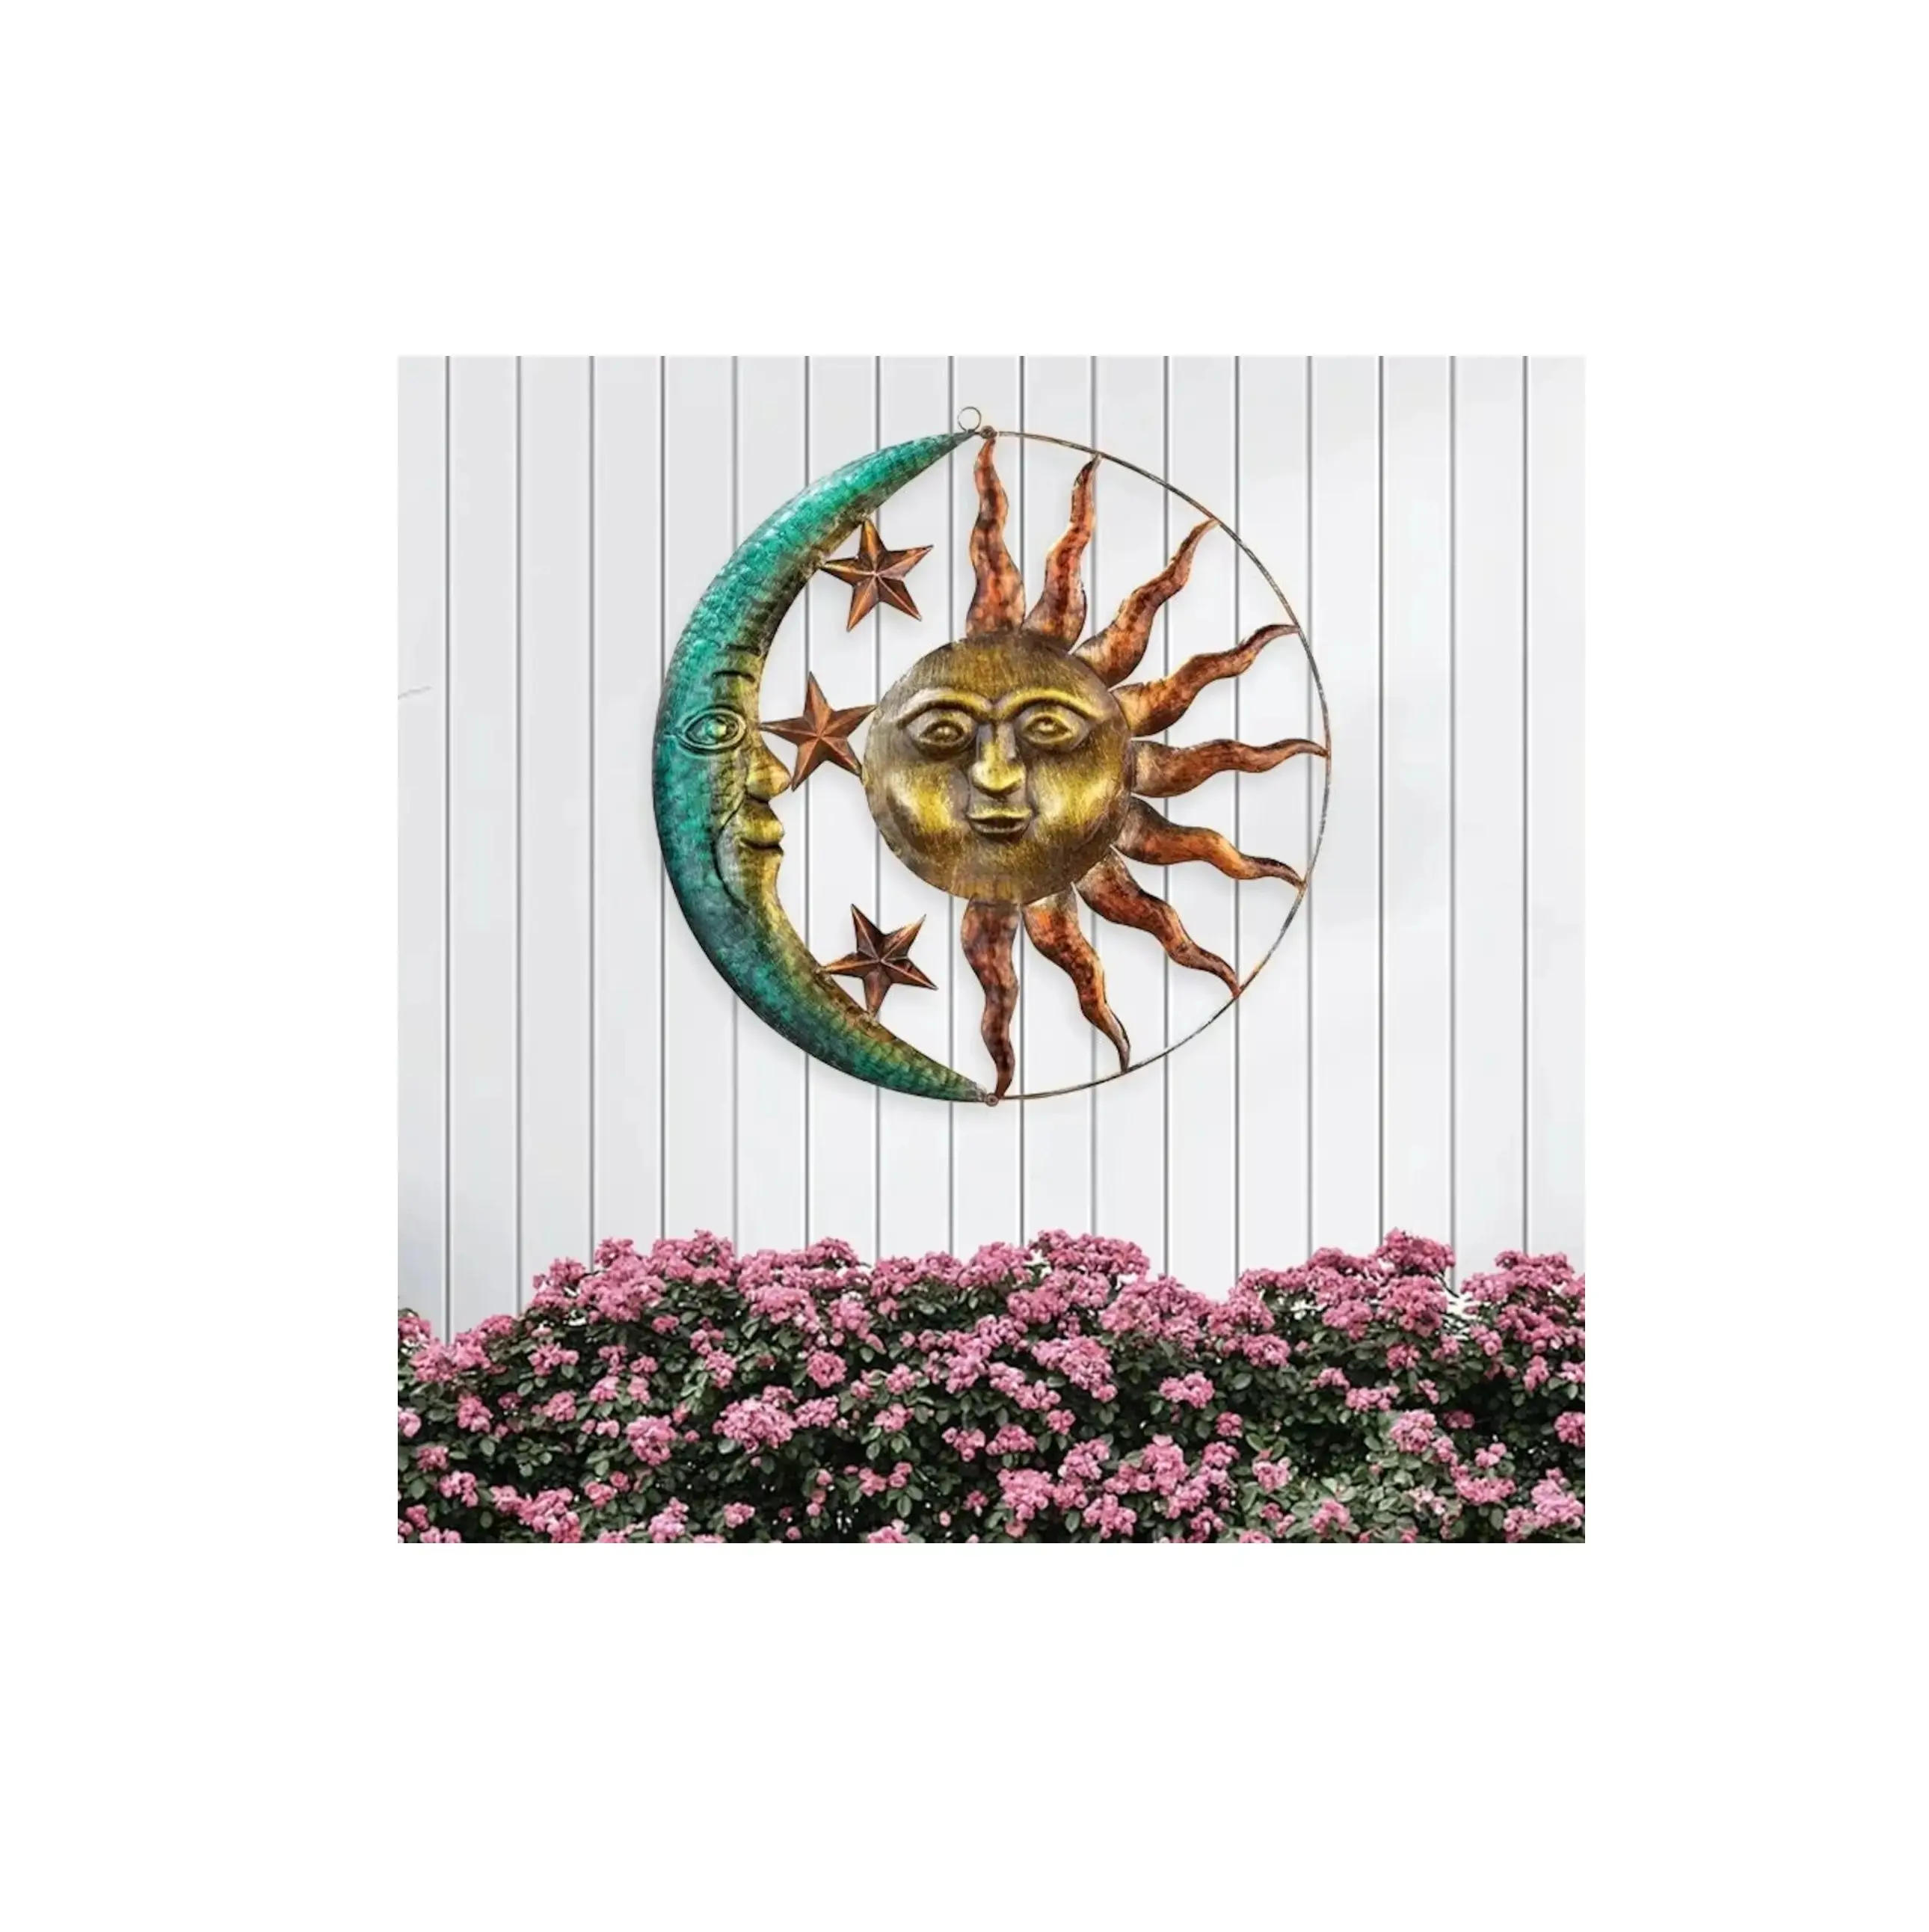 Best Quality Hanging Ornaments Home Decoration Sunflower Wall Arts for Bedroom Decoration Items Available at Export